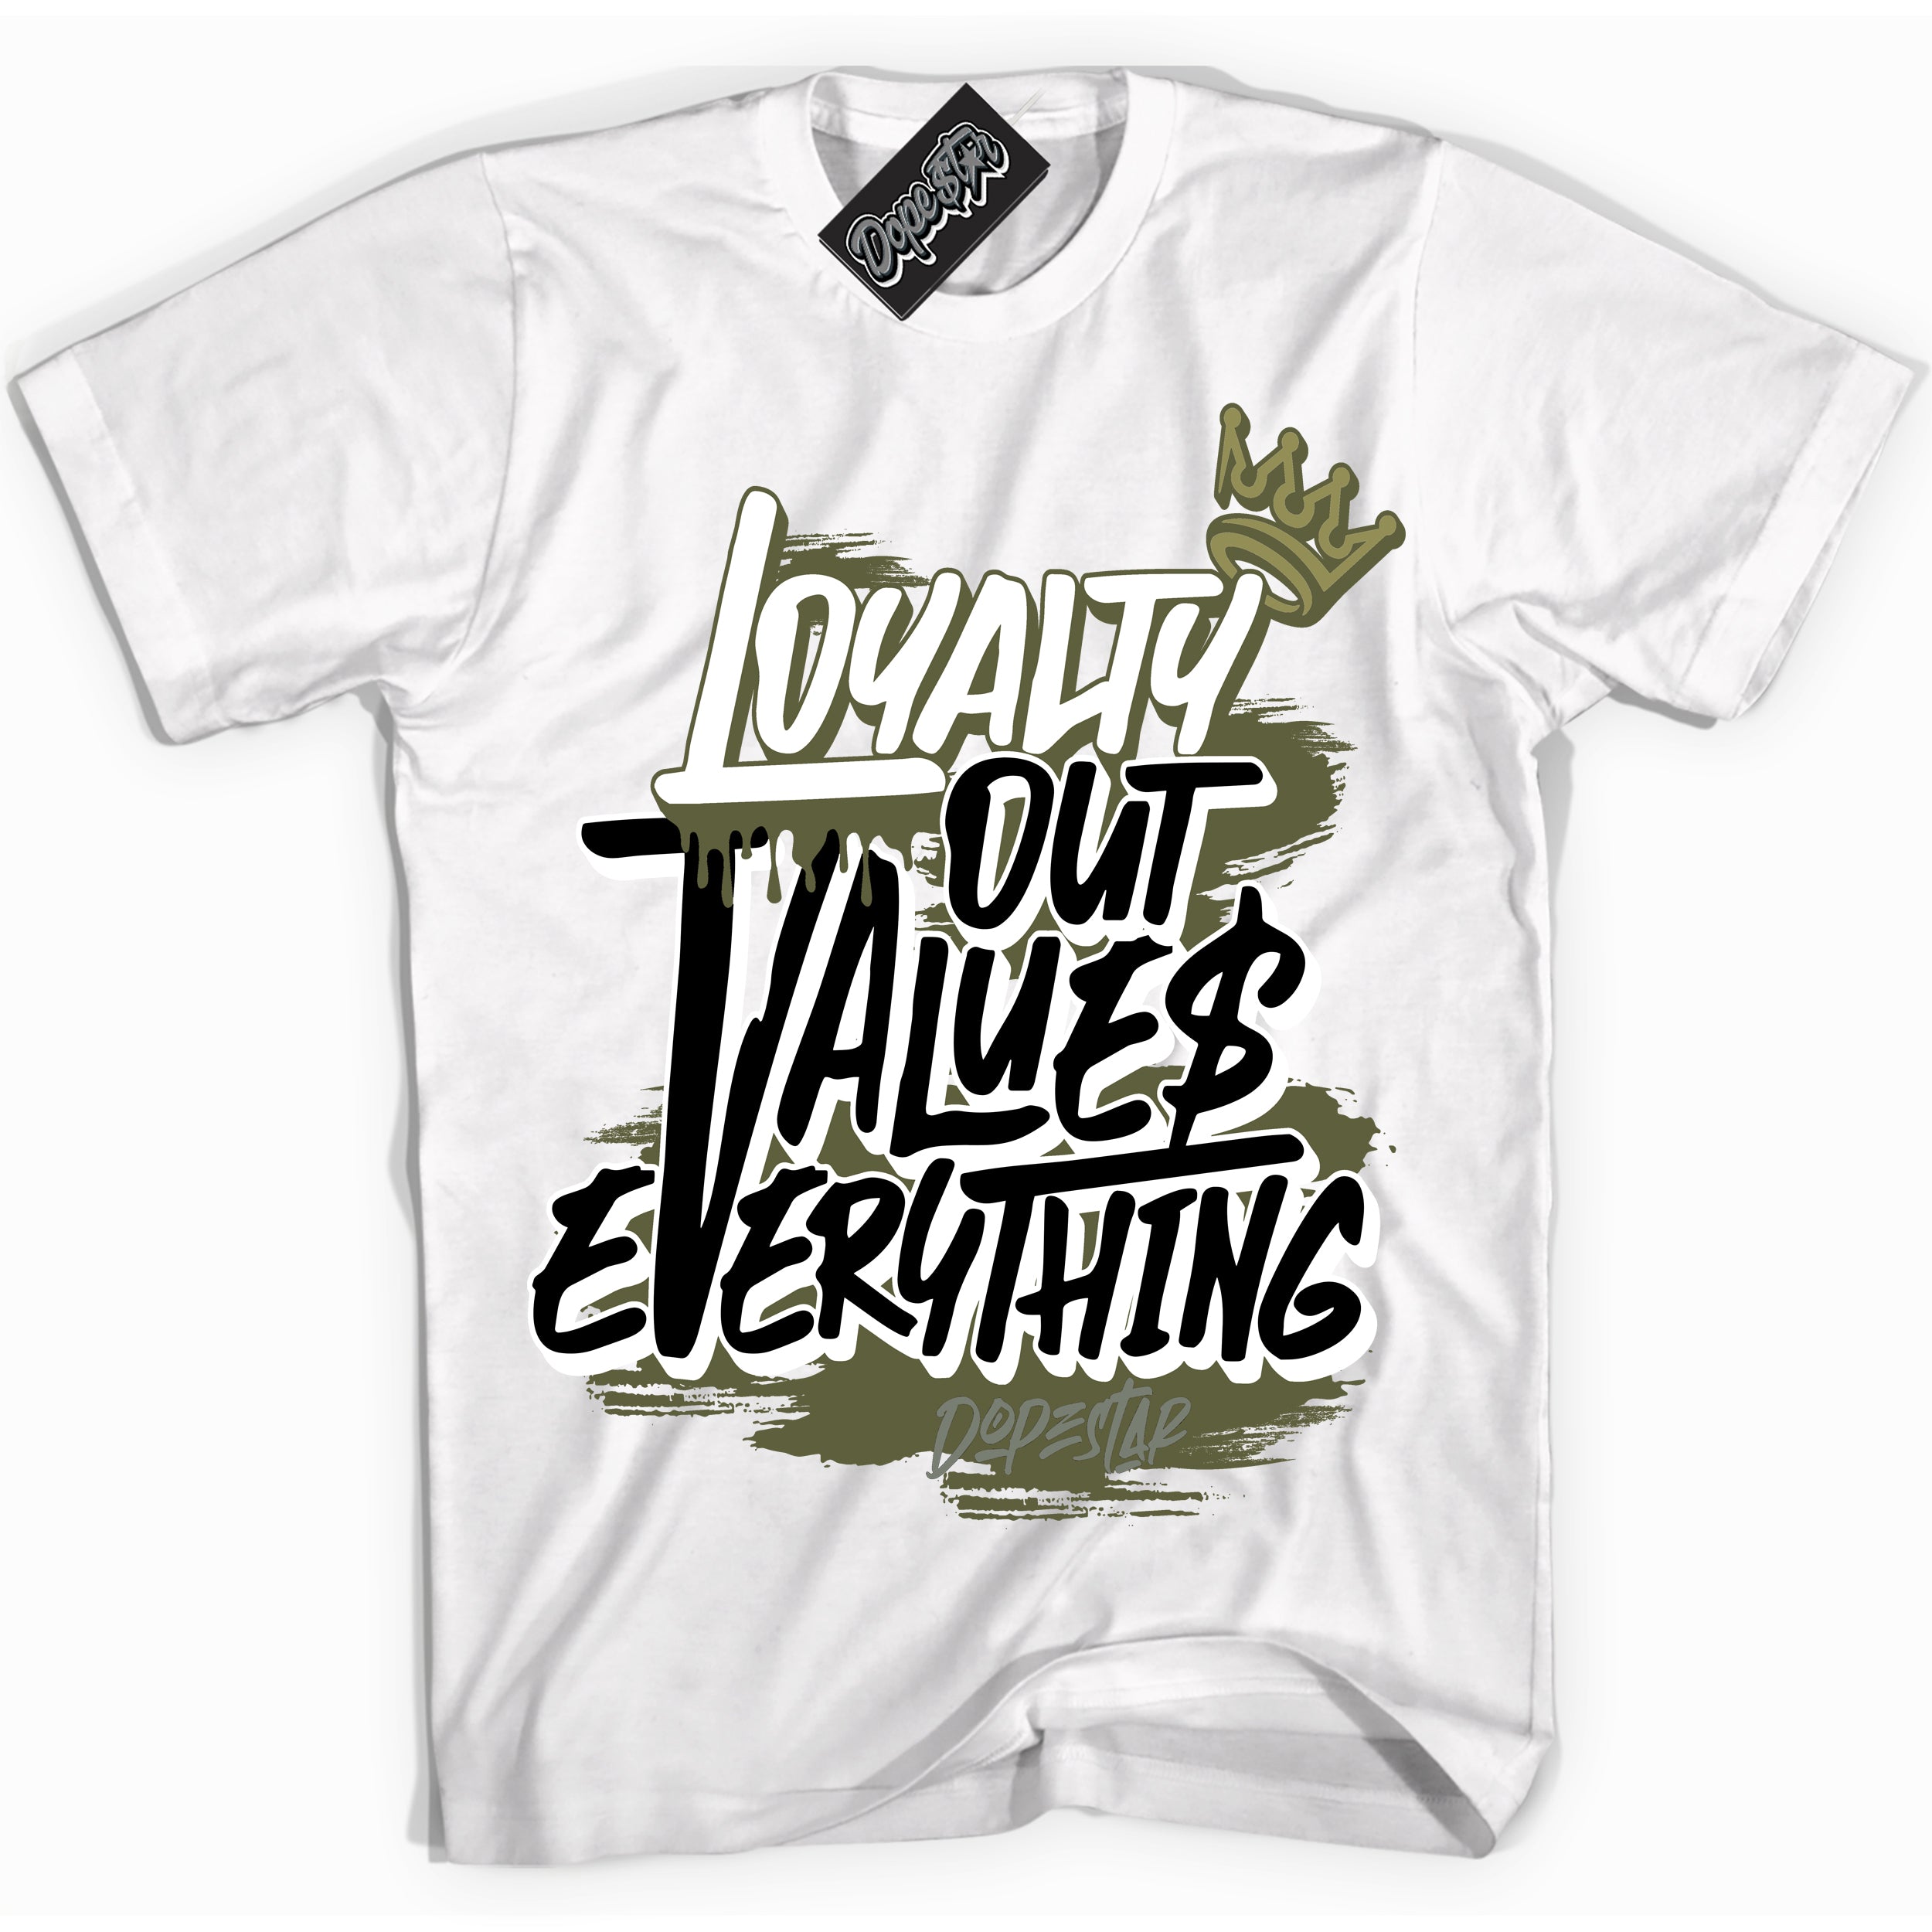 Cool White Shirt with “ Loyalty Out Values Everything” design that perfectly matches Craft Olive 4s Sneakers.